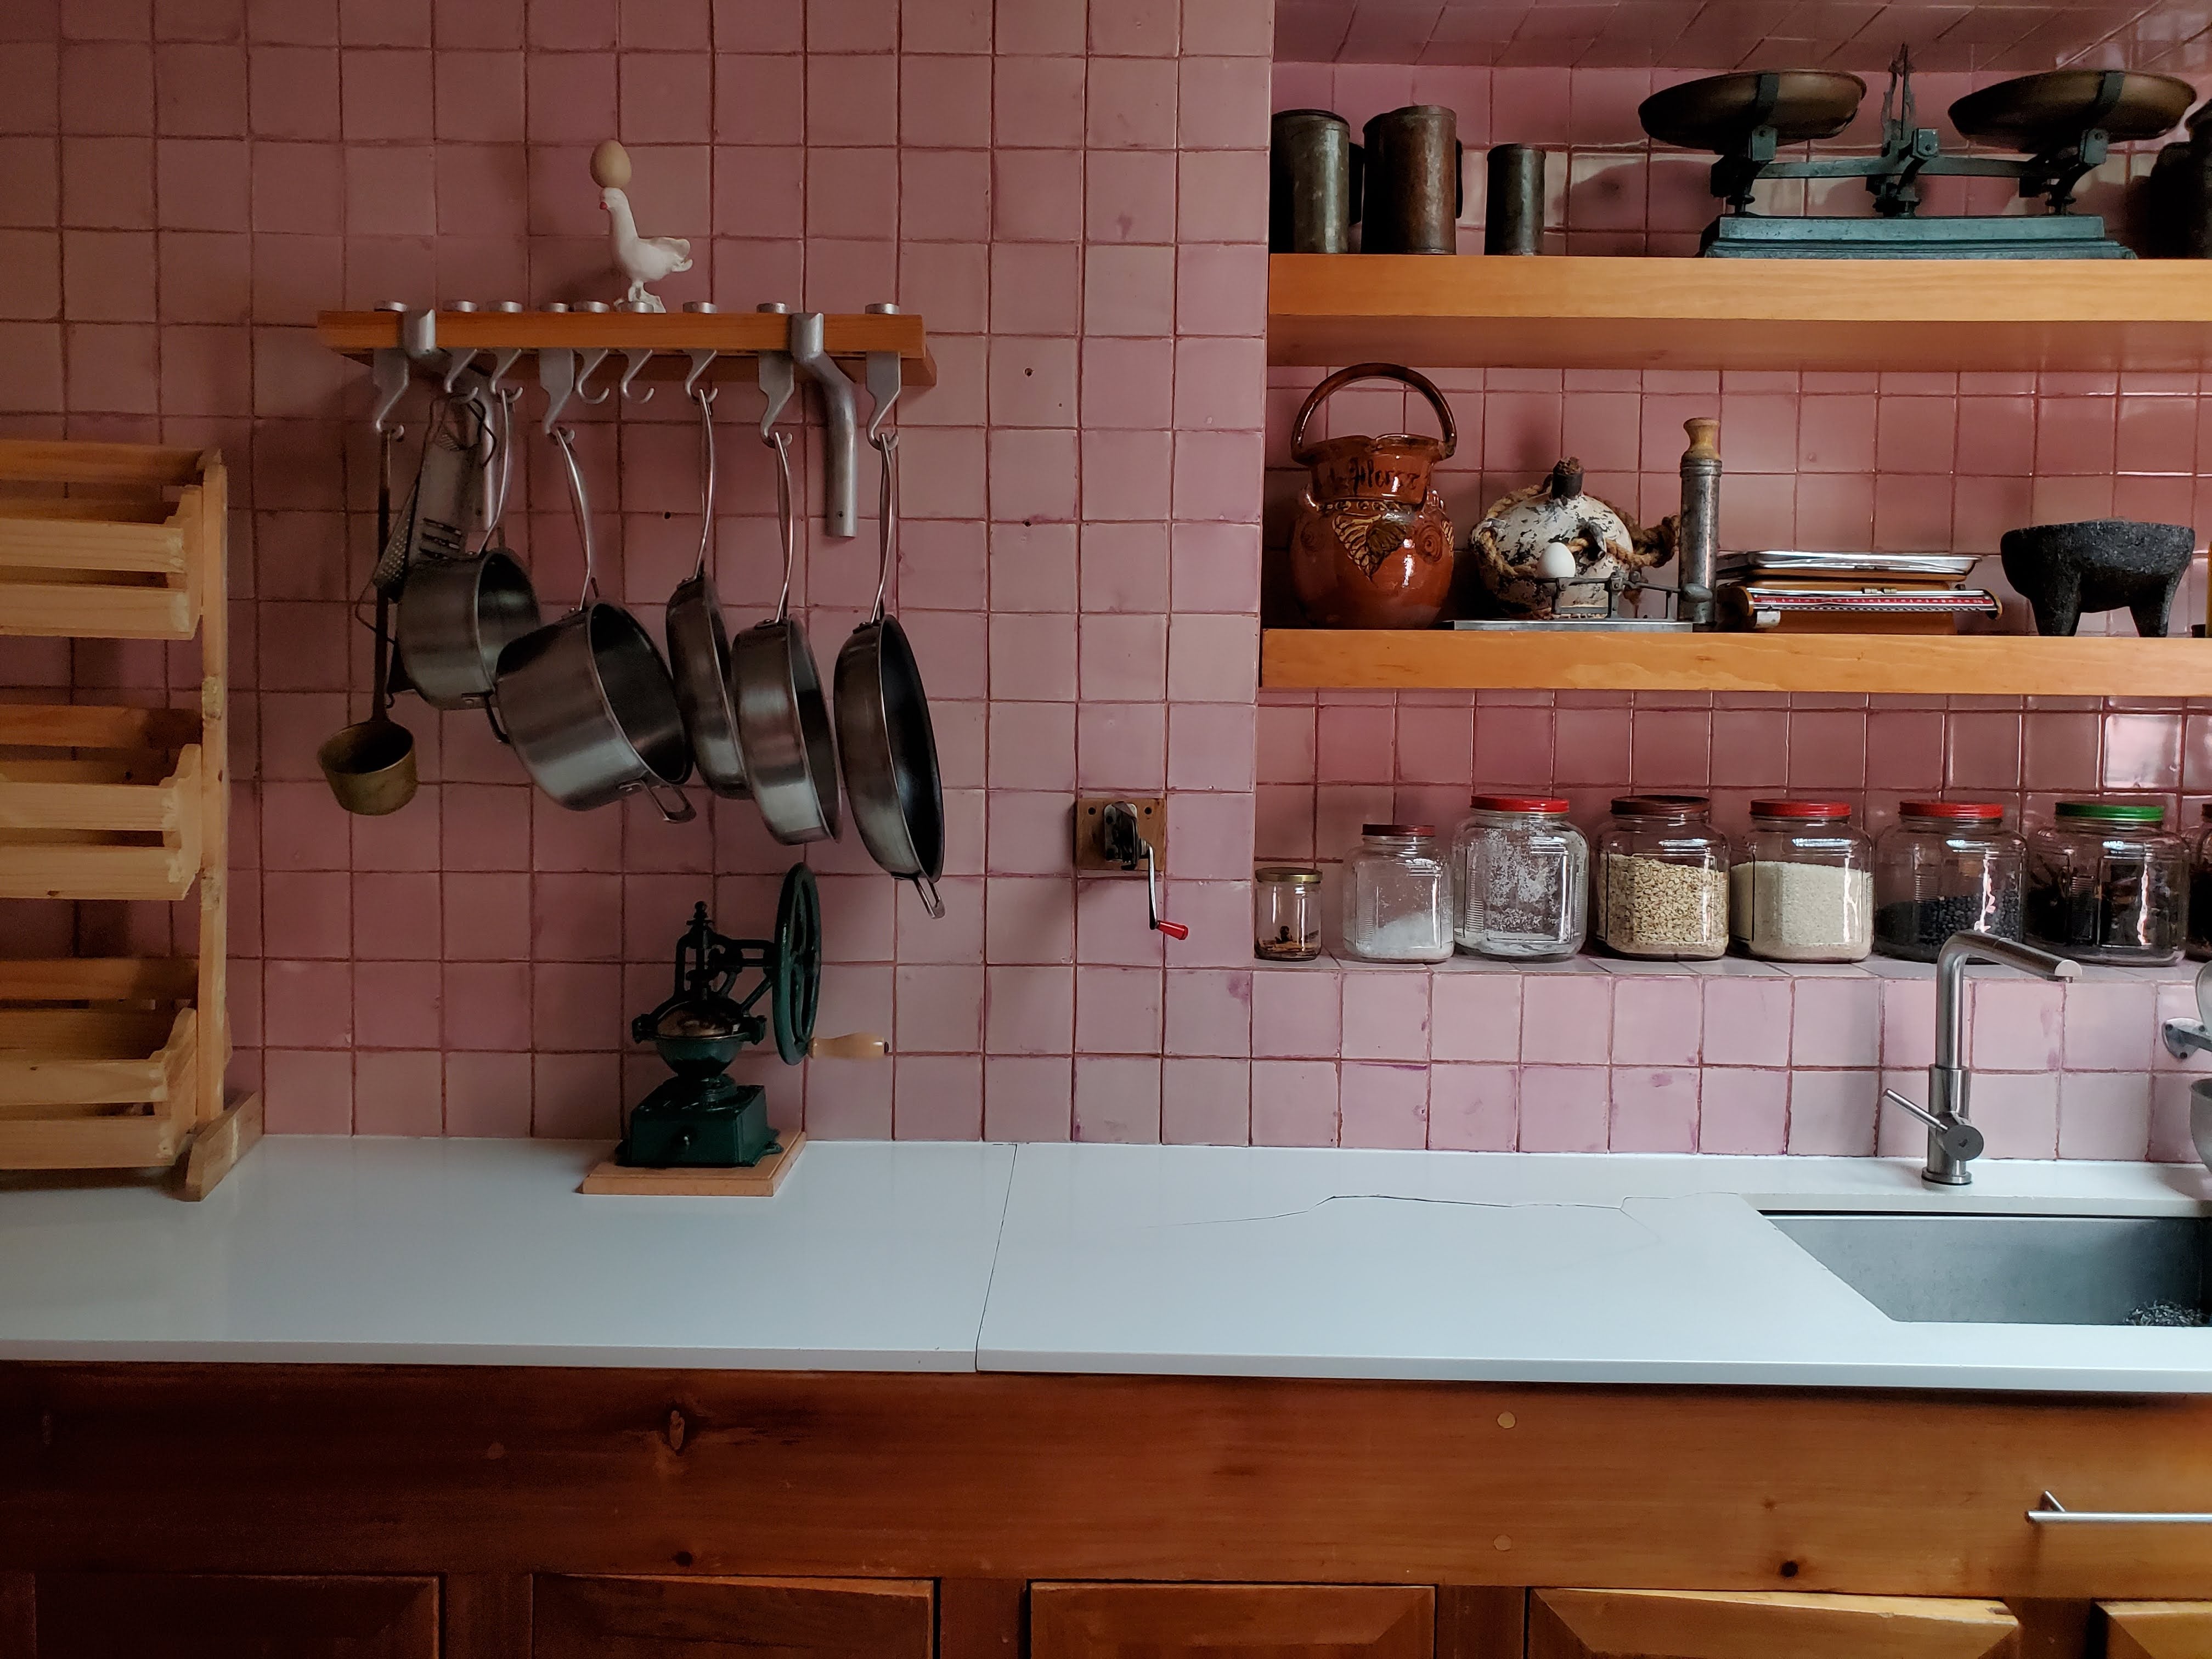 Pink tiled kitchen at Casa Pedregal designed by Luis Barragán in Mexico City.